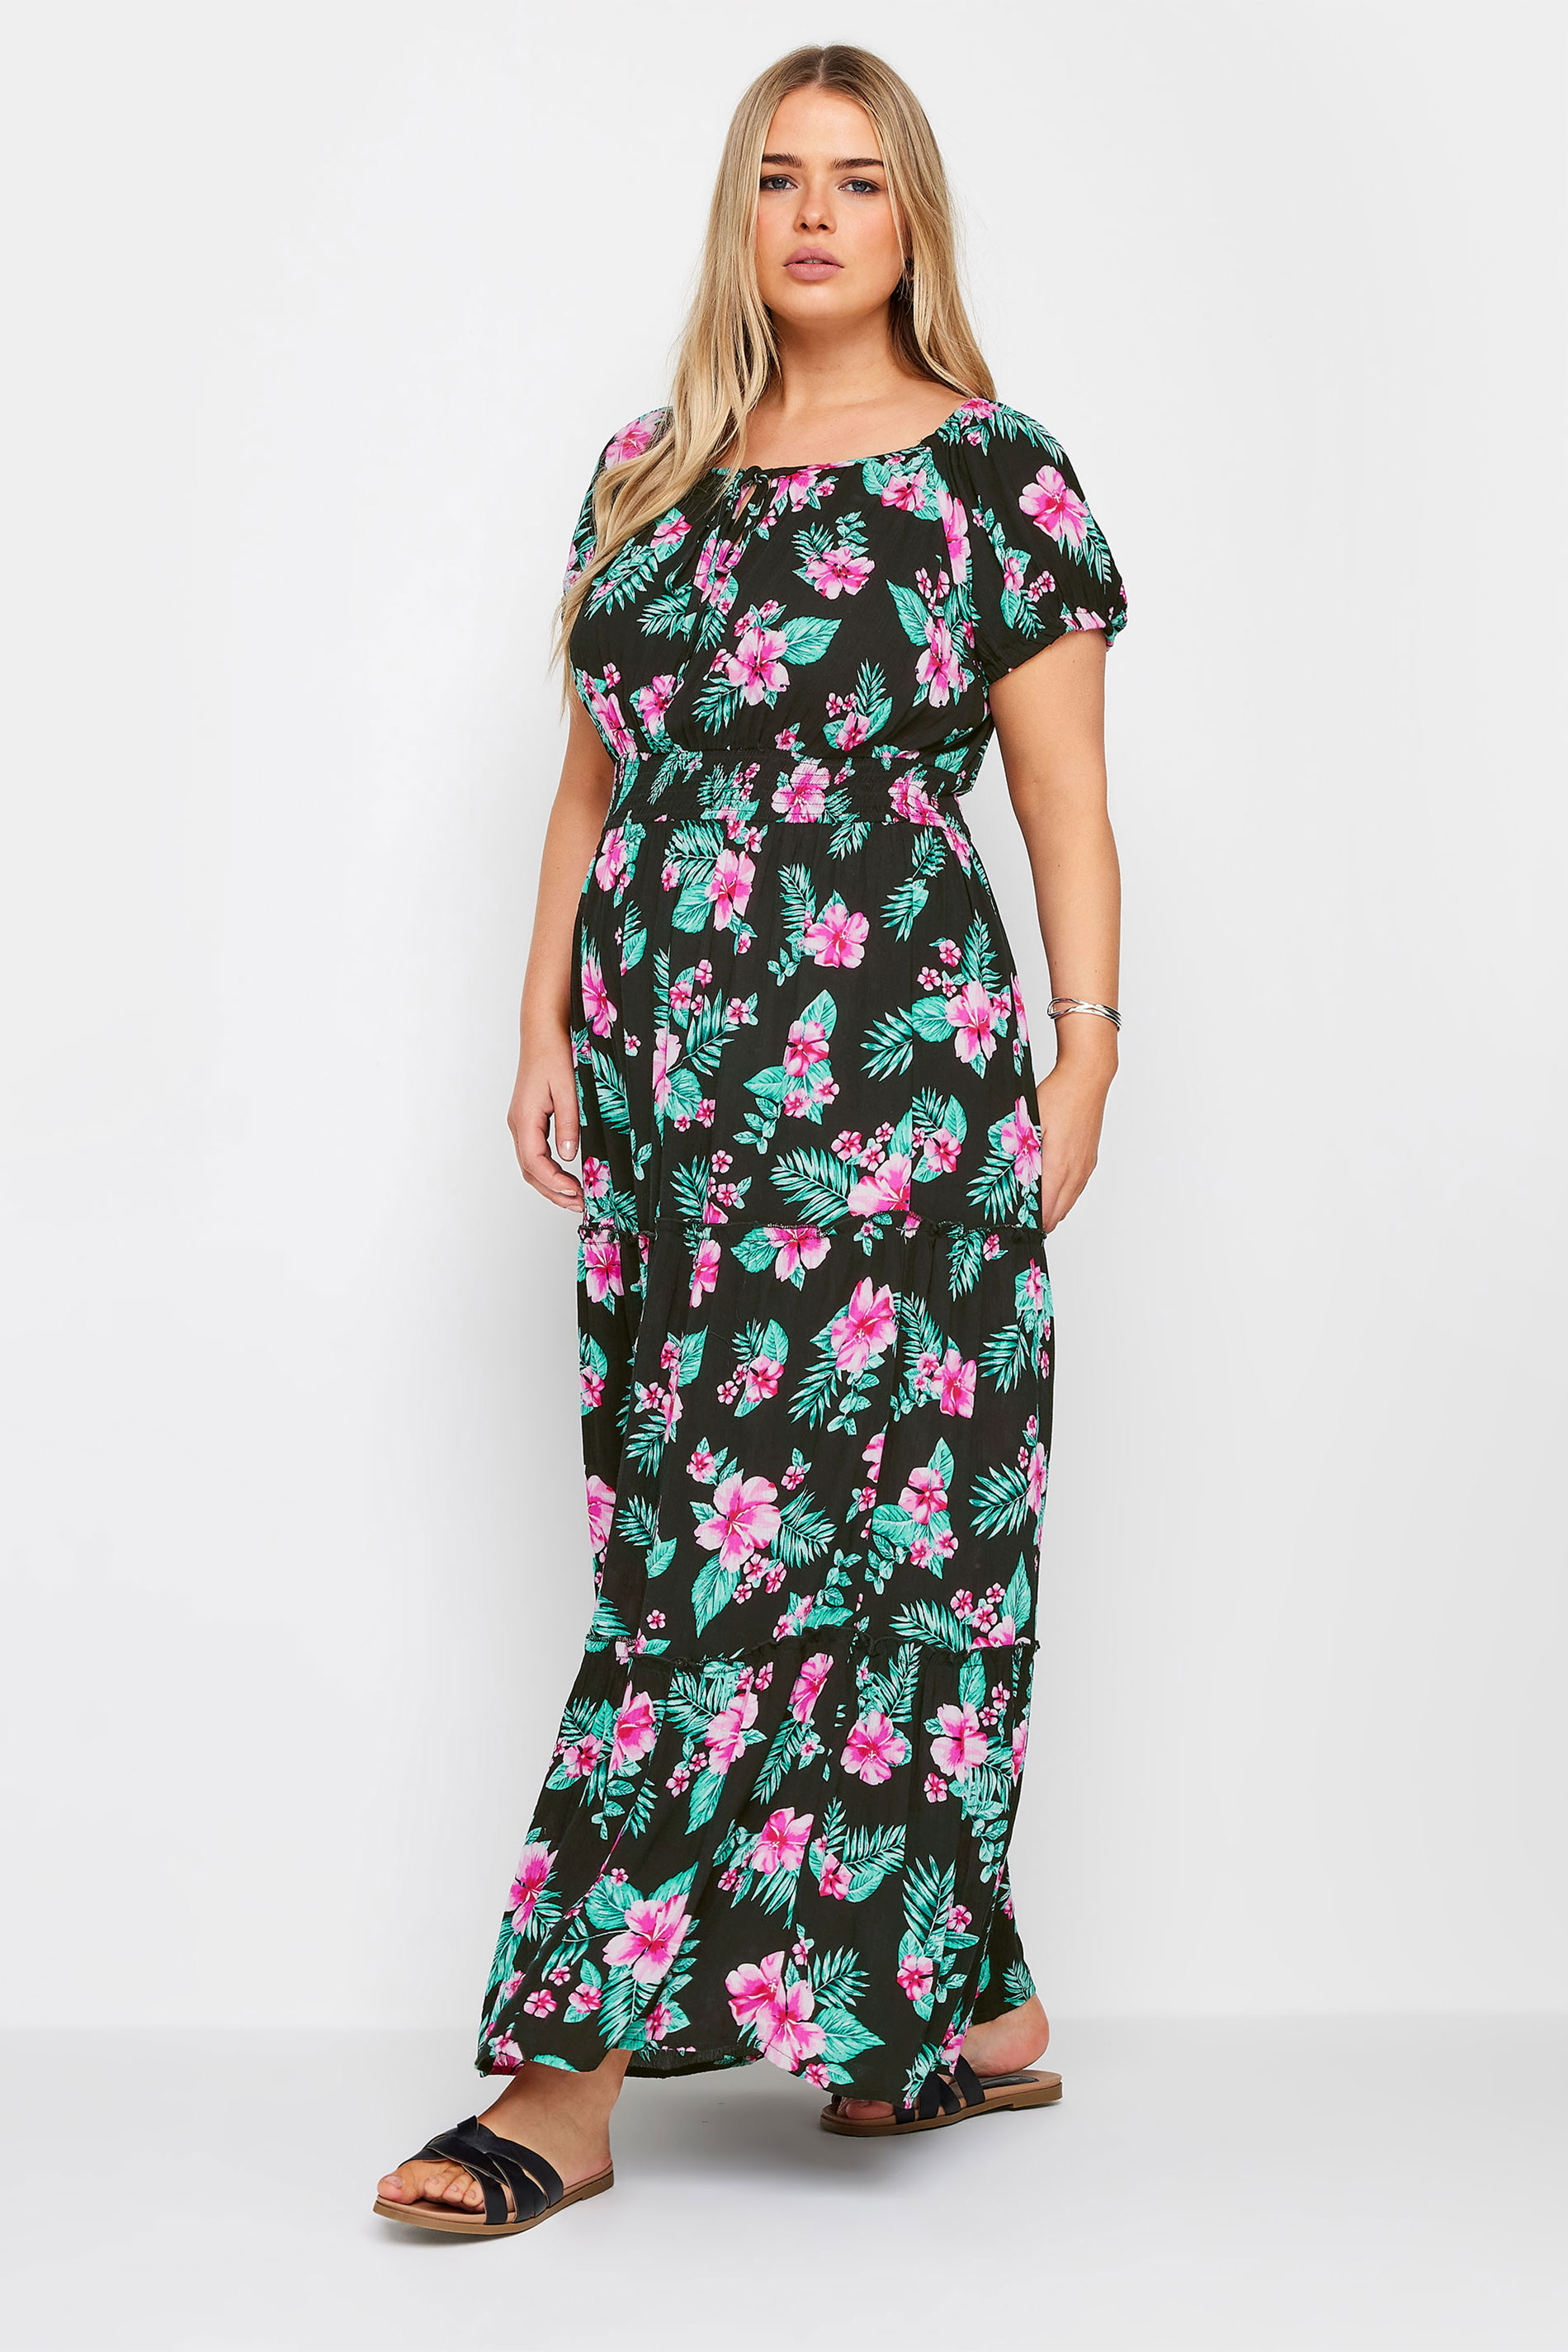 YOURS Plus Size Black Floral Tropical Print Bardot Maxi Dress | Yours Clothing 2